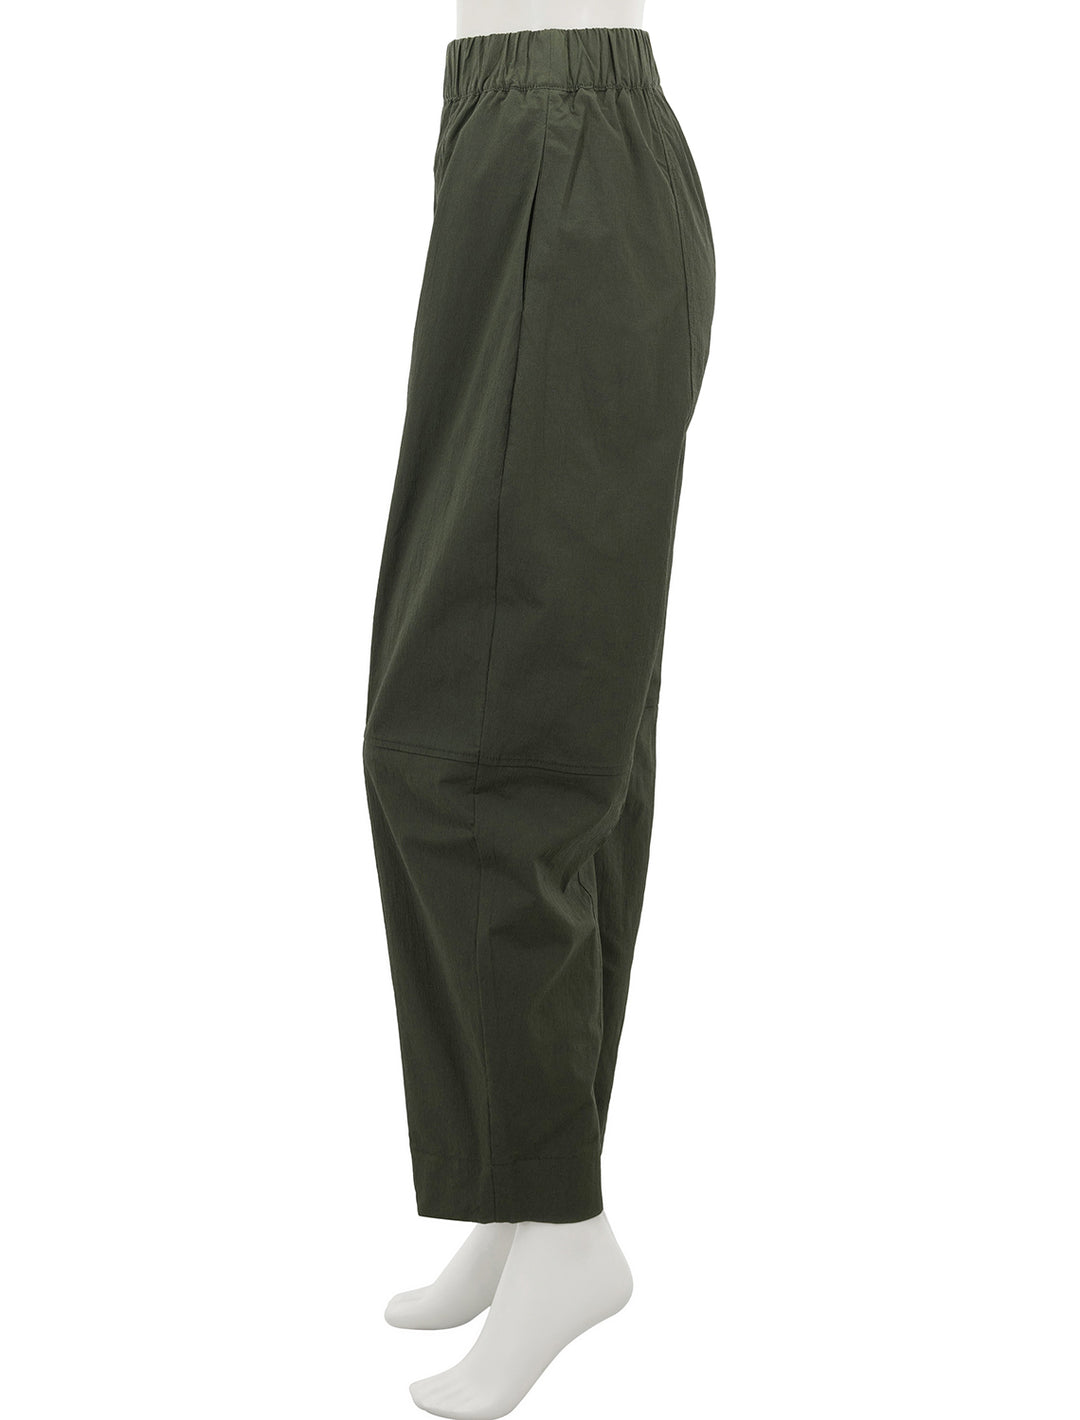 Side view of GANNI's curve pant in kombu green.